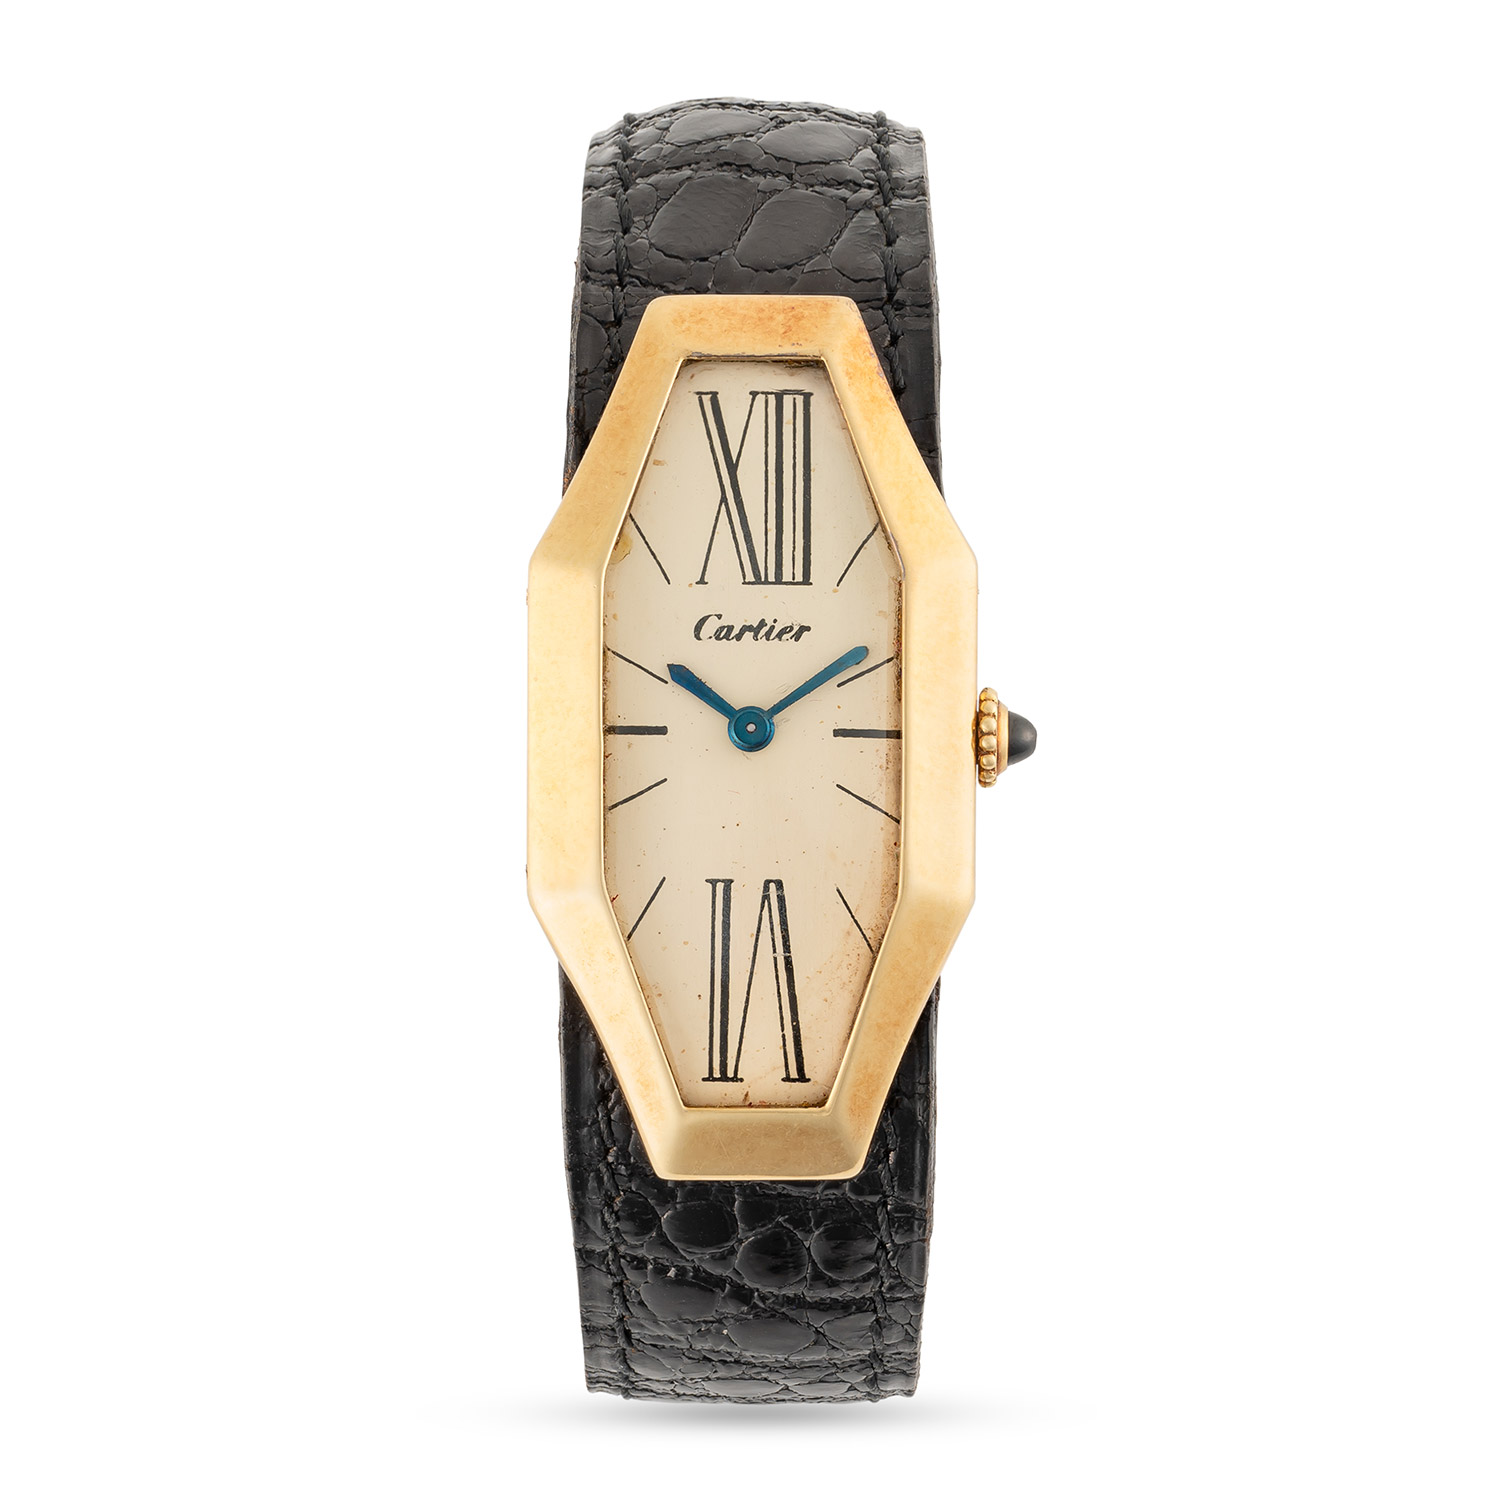 AN EXTREMELY RARE GENTLEMAN'S SIZE 18K SOLID GOLD CARTIER LONDON LOSANGE ELONGATED OCTAGONAL WRIST - Image 2 of 14